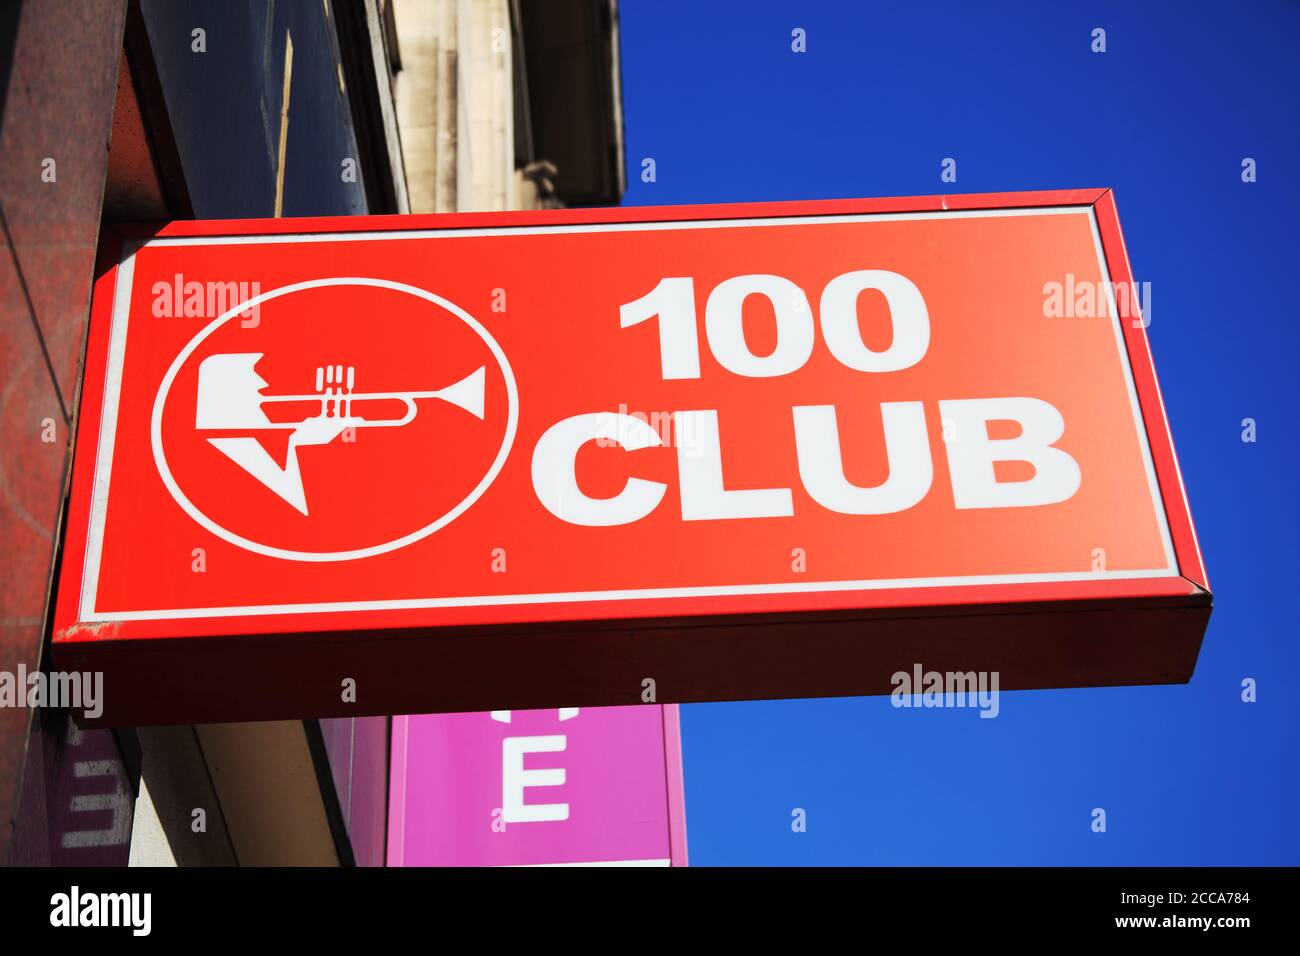 London, UK, April 1, 2012 : The 100 Club jazz and rock music venue logo advertising sign in Oxford Street which is a popular travel destination touris Stock Photo